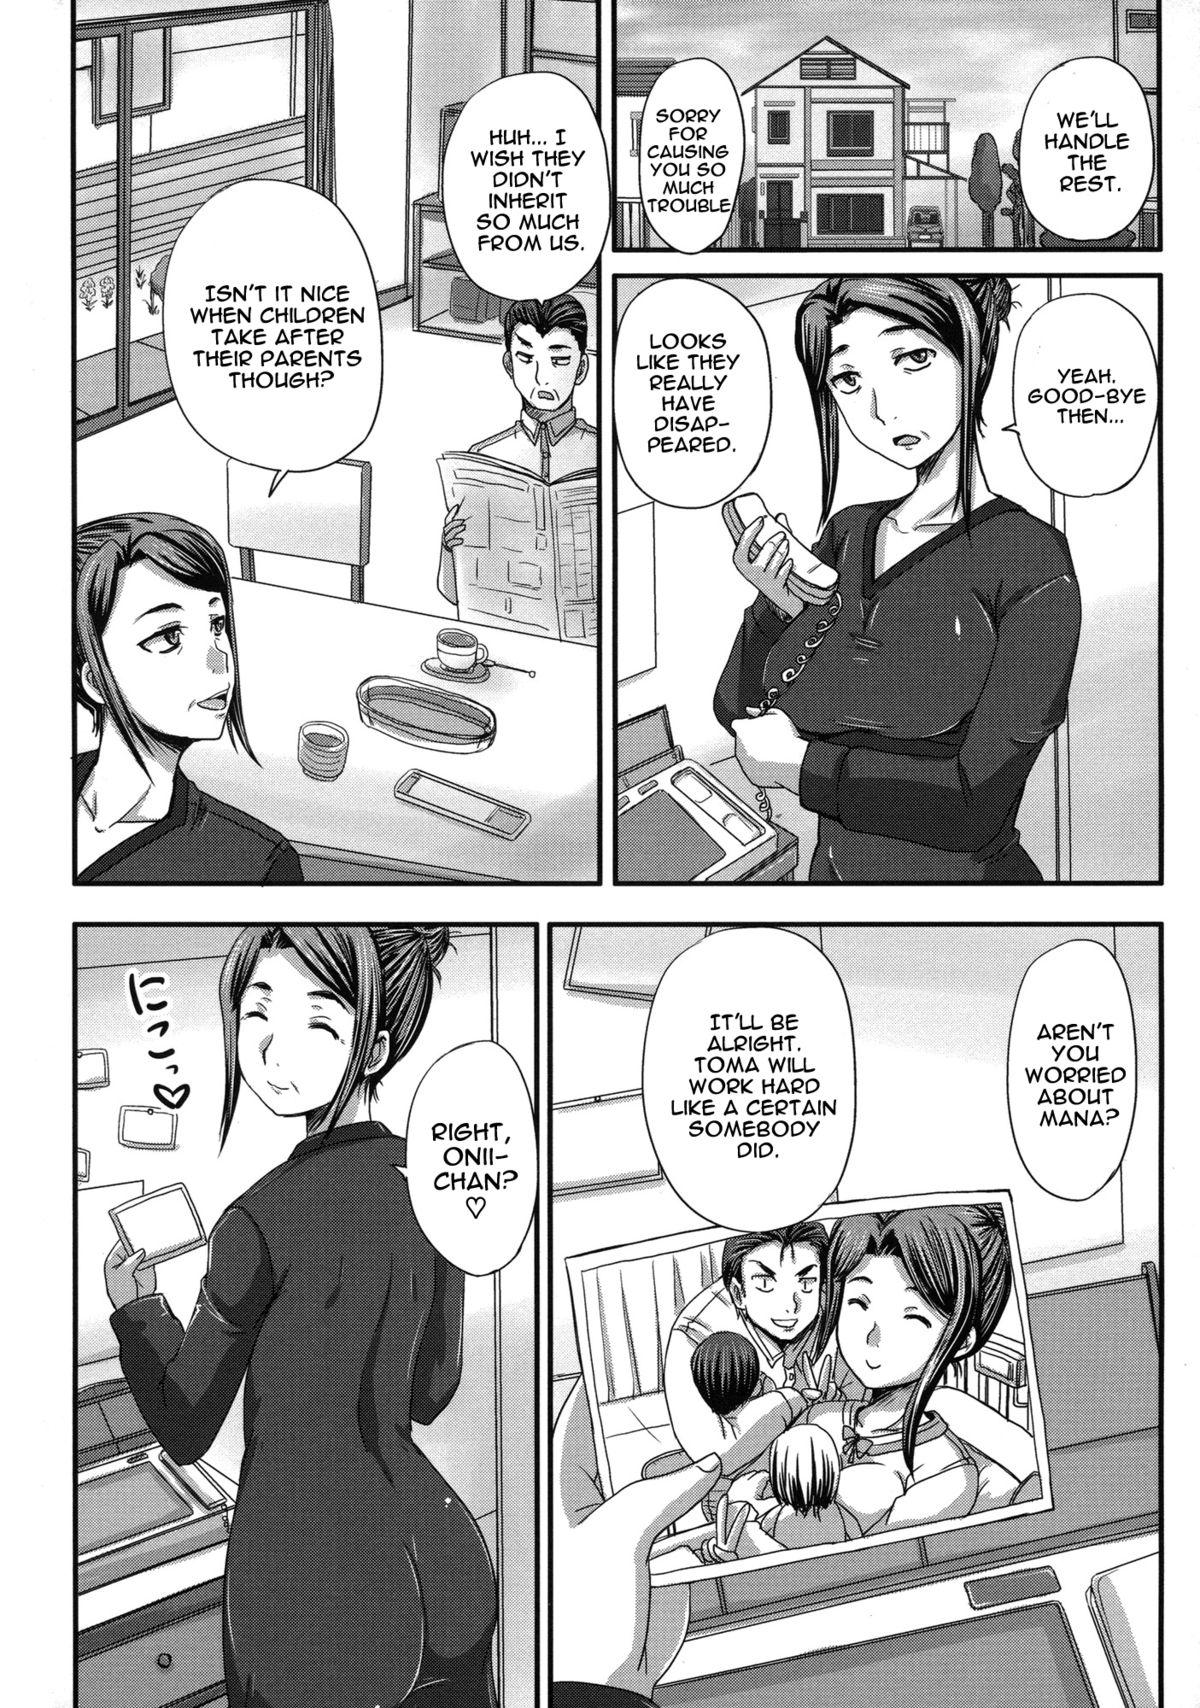 [Akigami Satoru] Tsukurou! Onaho Ane - Let's made a Sex Sleeve from Sister | Turning My Elder-Sister into a Sex-Sleeve [English] {doujin-moe.us} 84